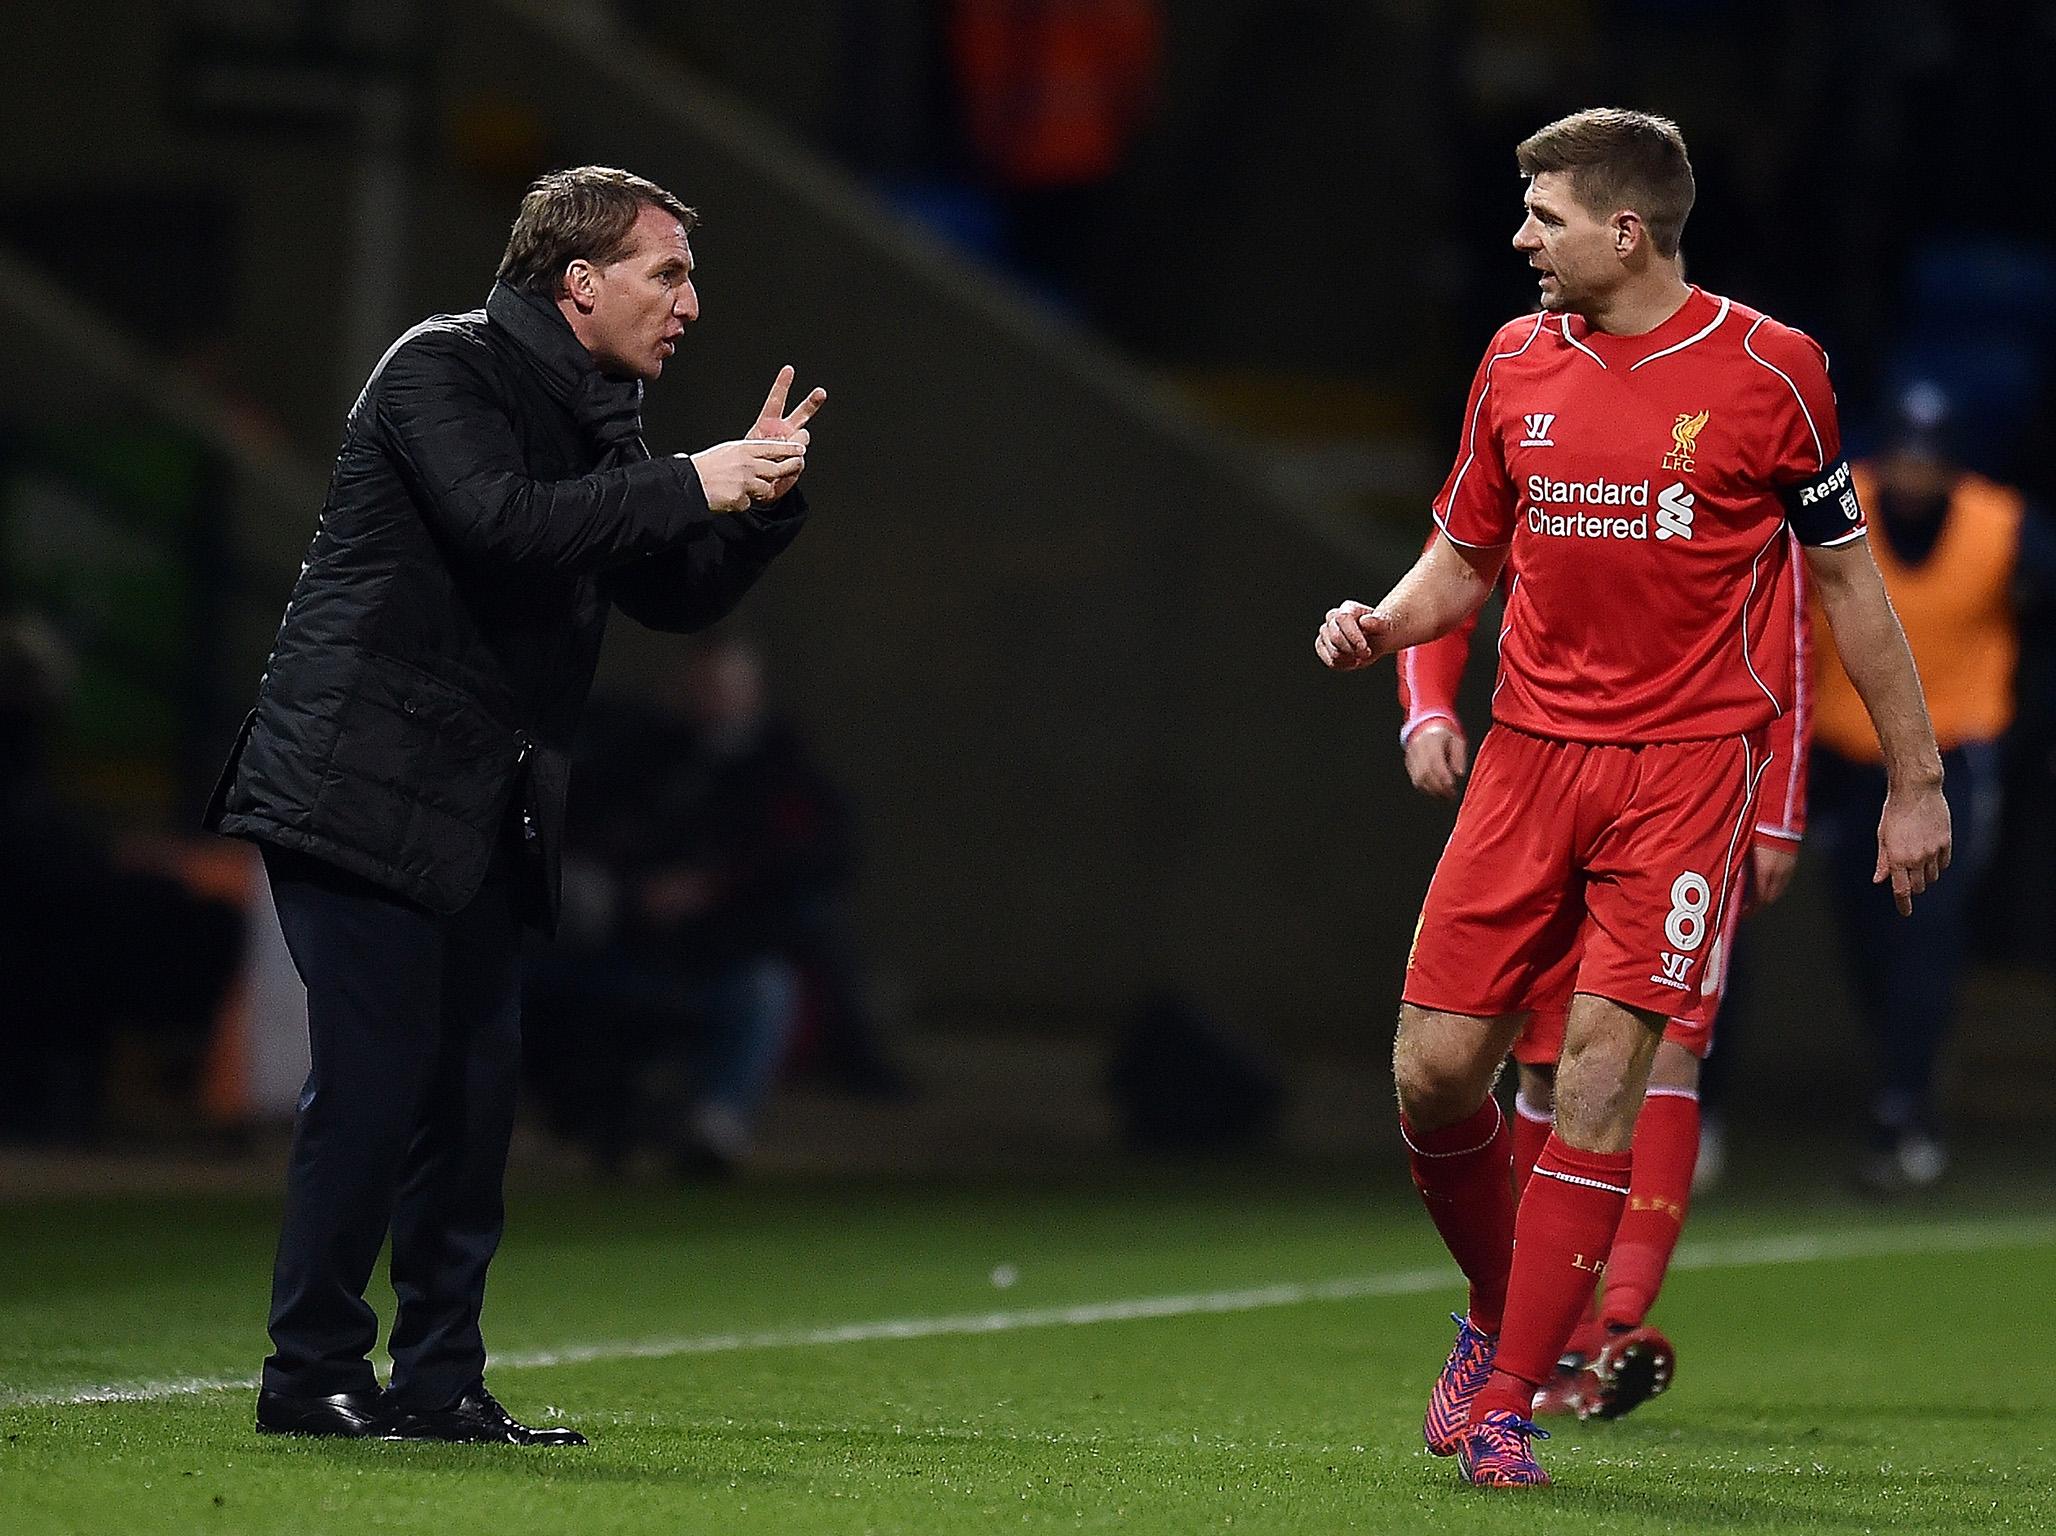 Celtic&apos;s Brendan Rodgers welcomes new Rangers manager Steven Gerrard to &apos;land of no sleep&apos;